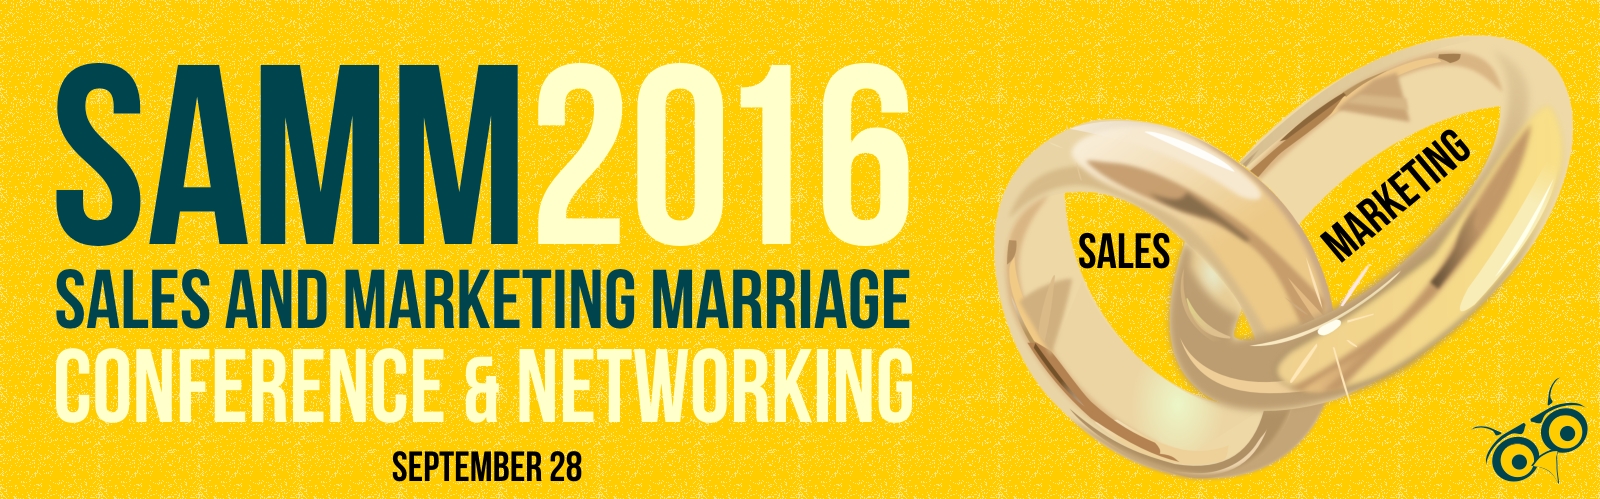 SaMM2016 - The Sales & Marketing Marriage Conference